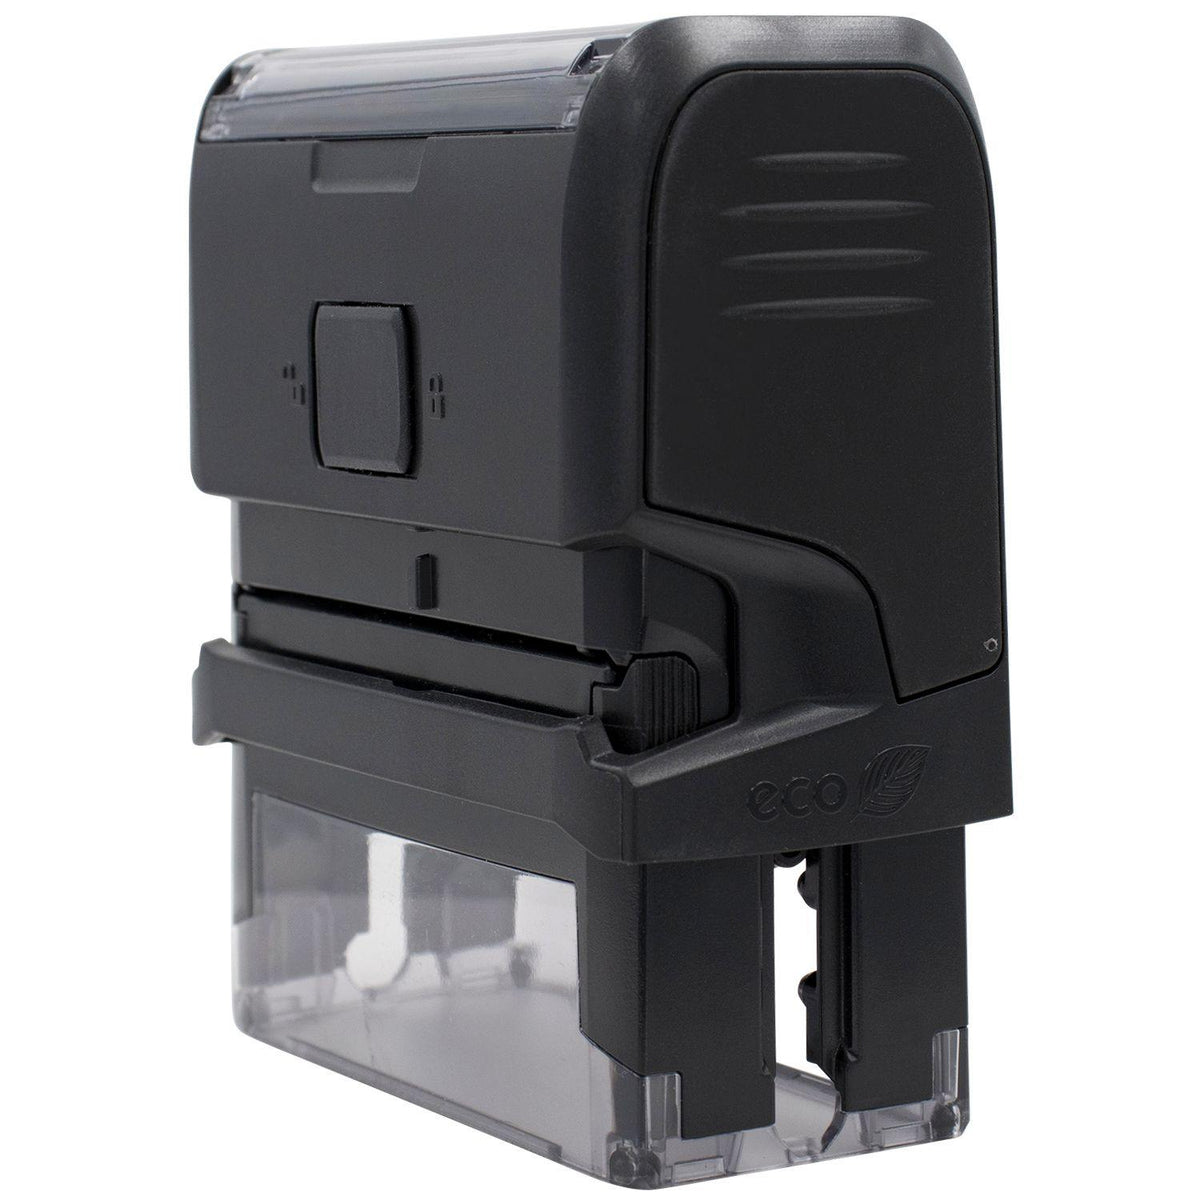 Large Self Inking Wire Transfer Stamp - Engineer Seal Stamps - Brand_Trodat, Impression Size_Large, Stamp Type_Self-Inking Stamp, Type of Use_Finance